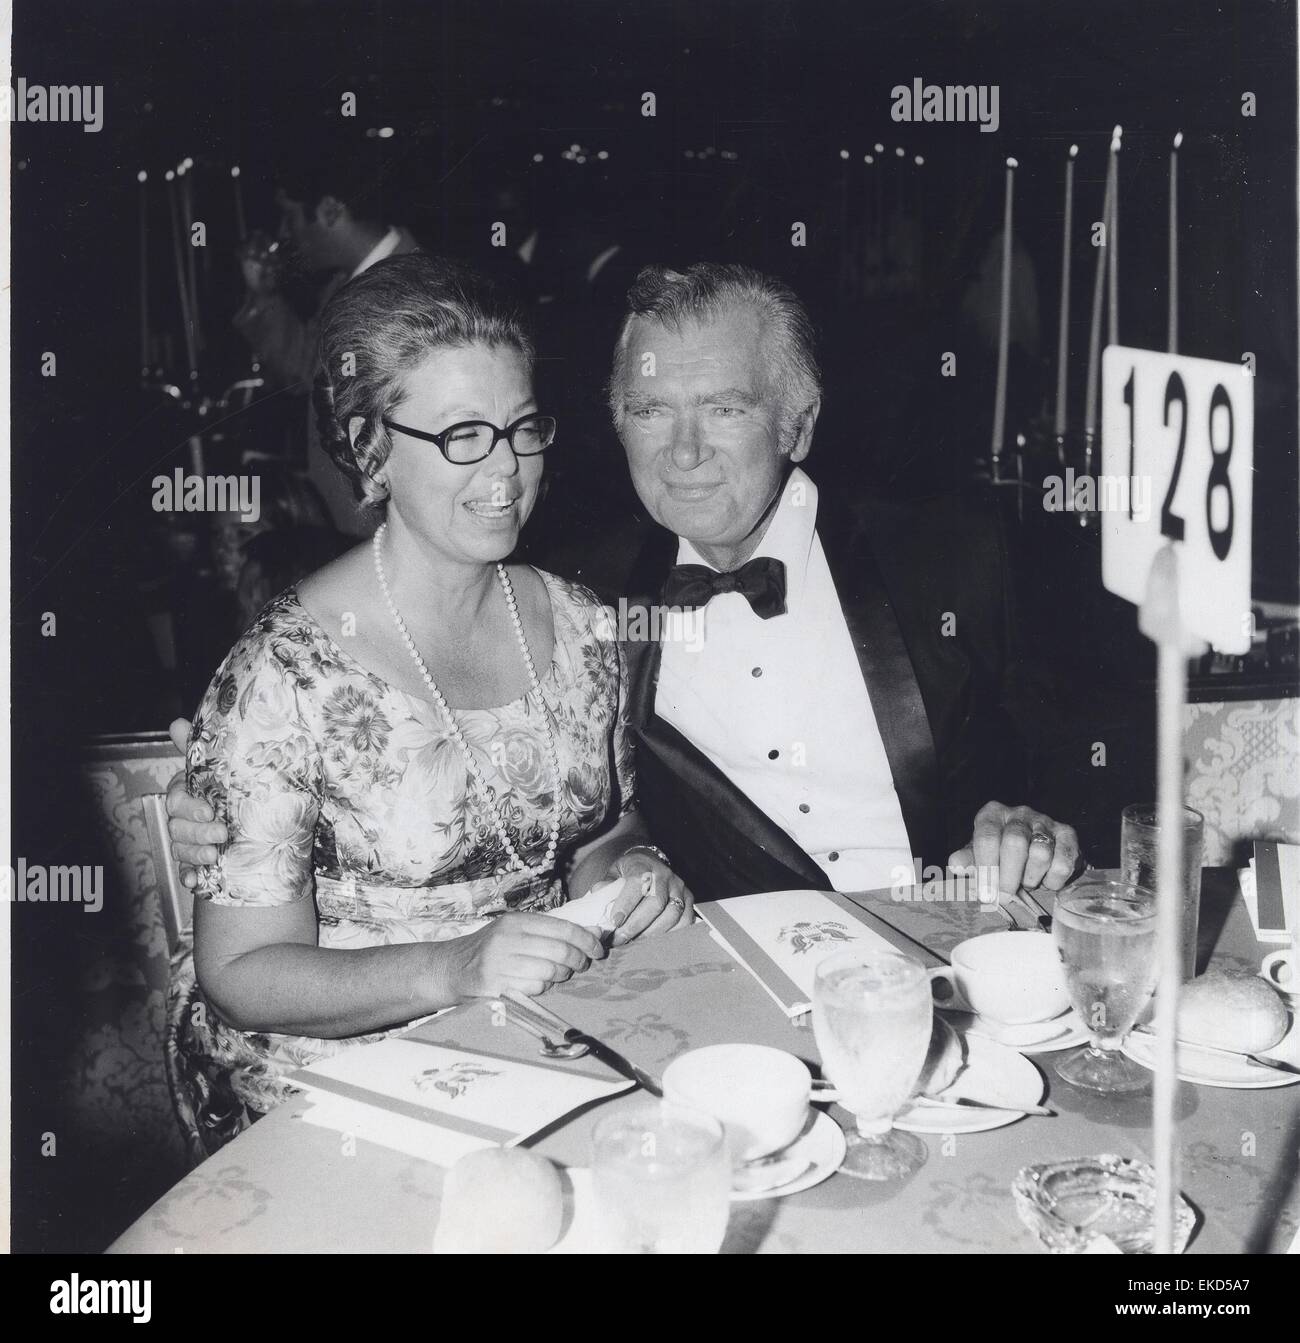 BUDDY EBSEN with wife at Dinner Fox George Murphy, Hilton Hotel ...